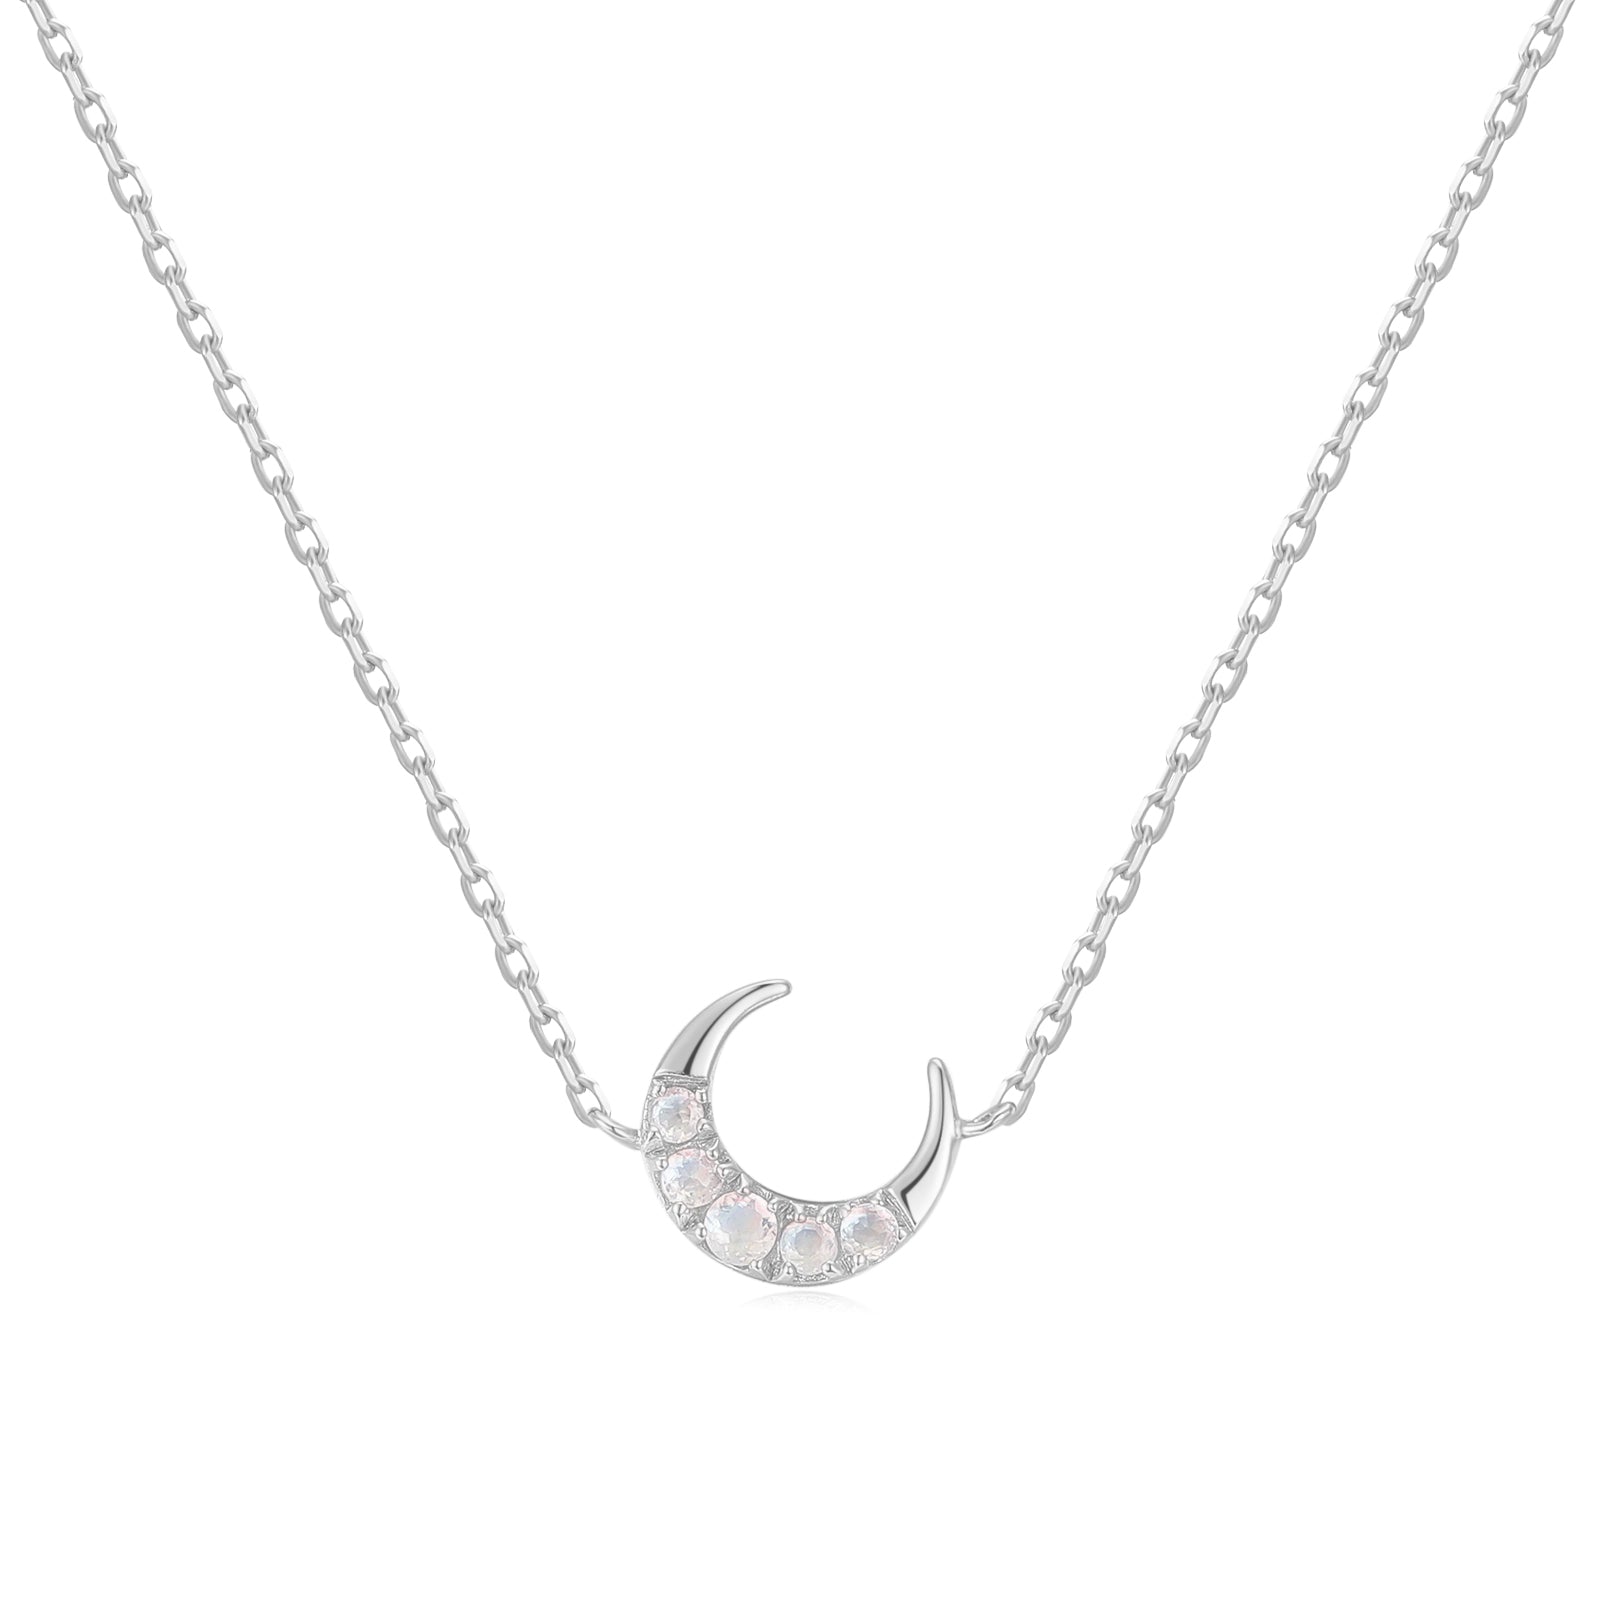 Moonstone Silver Petite Moon Necklace | LOVE BY THE MOON